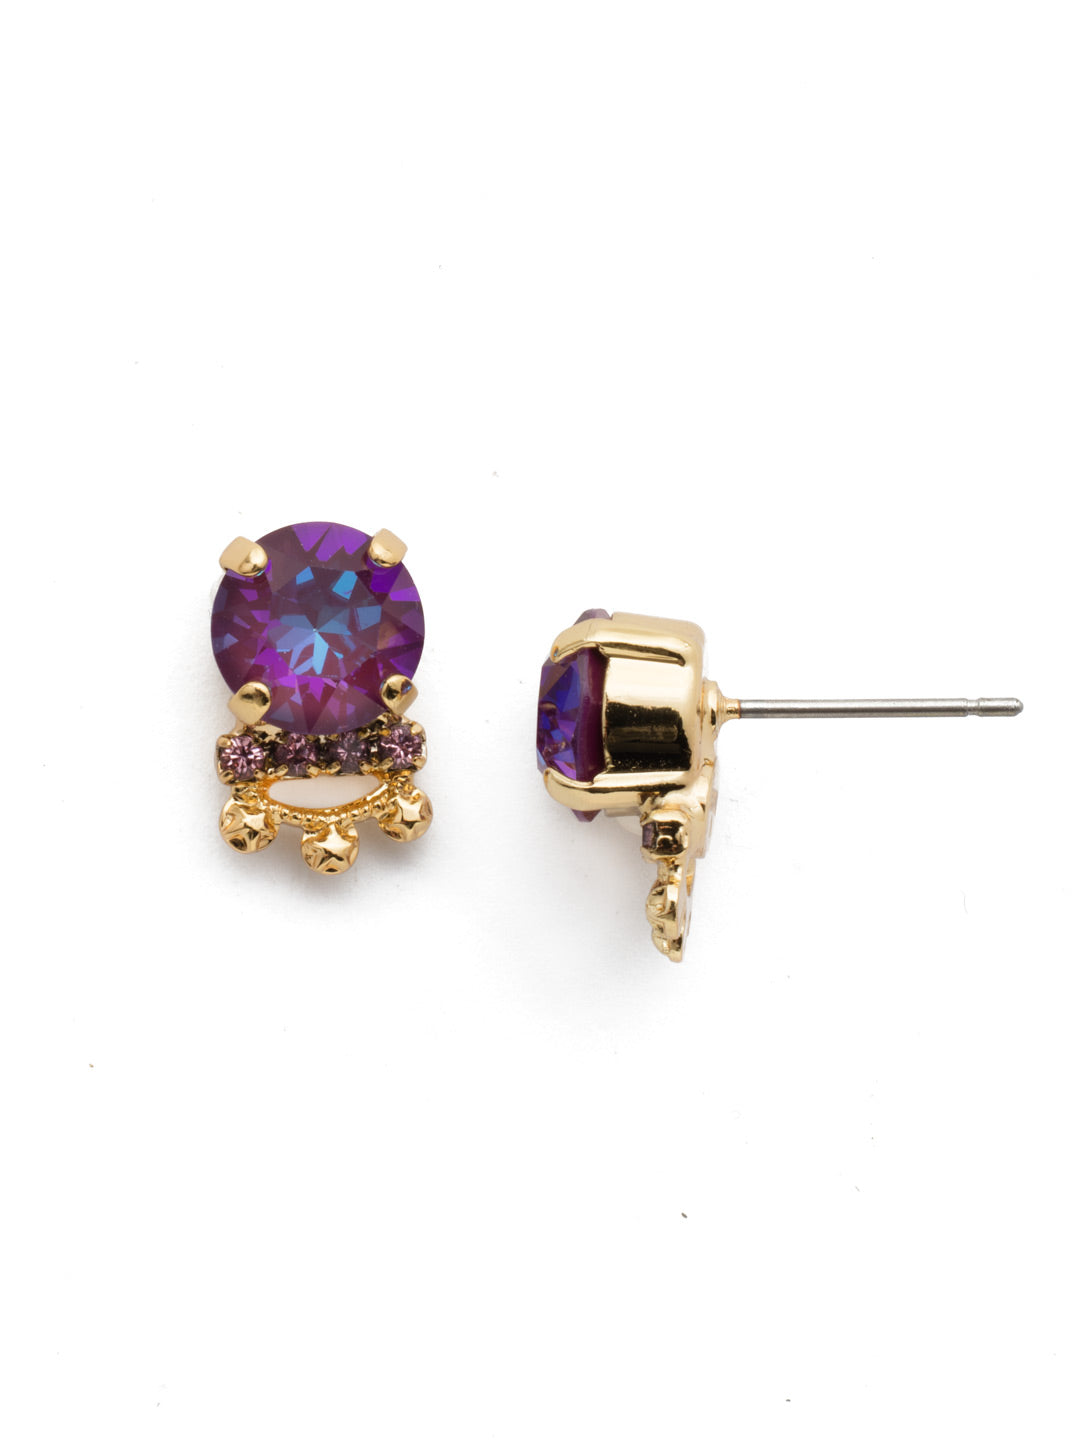 Muriel Stud Earrings - EES20BGBGA - Fasten on the Muriel Stud Earrings for a little something extra from a stud. A simple round crystal goes next level when it's accented by added sparkle and hand-soldered metalwork. From Sorrelli's Begonia collection in our Bright Gold-tone finish.